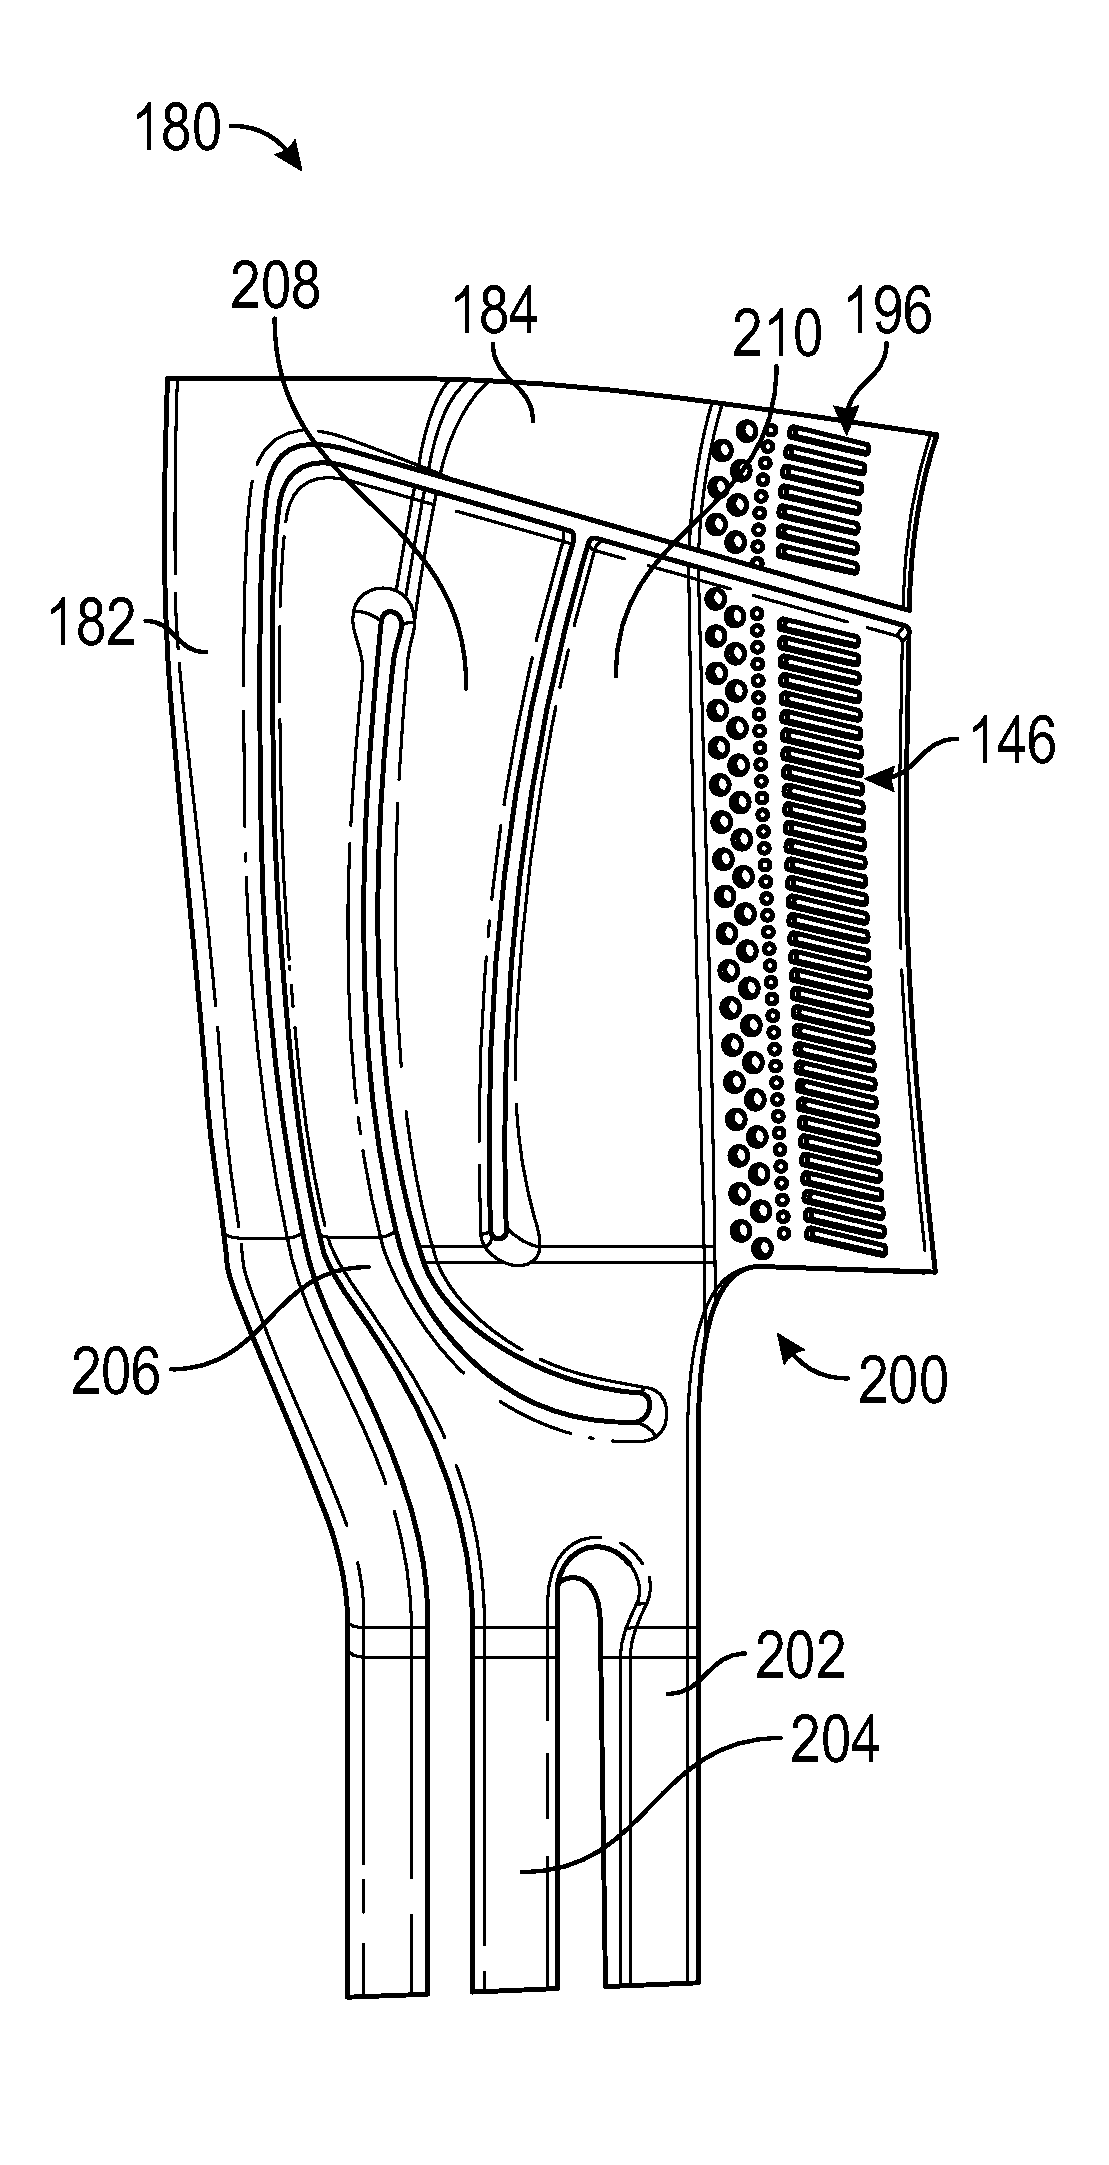 Aft flowing serpentine cavities and cores for airfoils of gas turbine engines